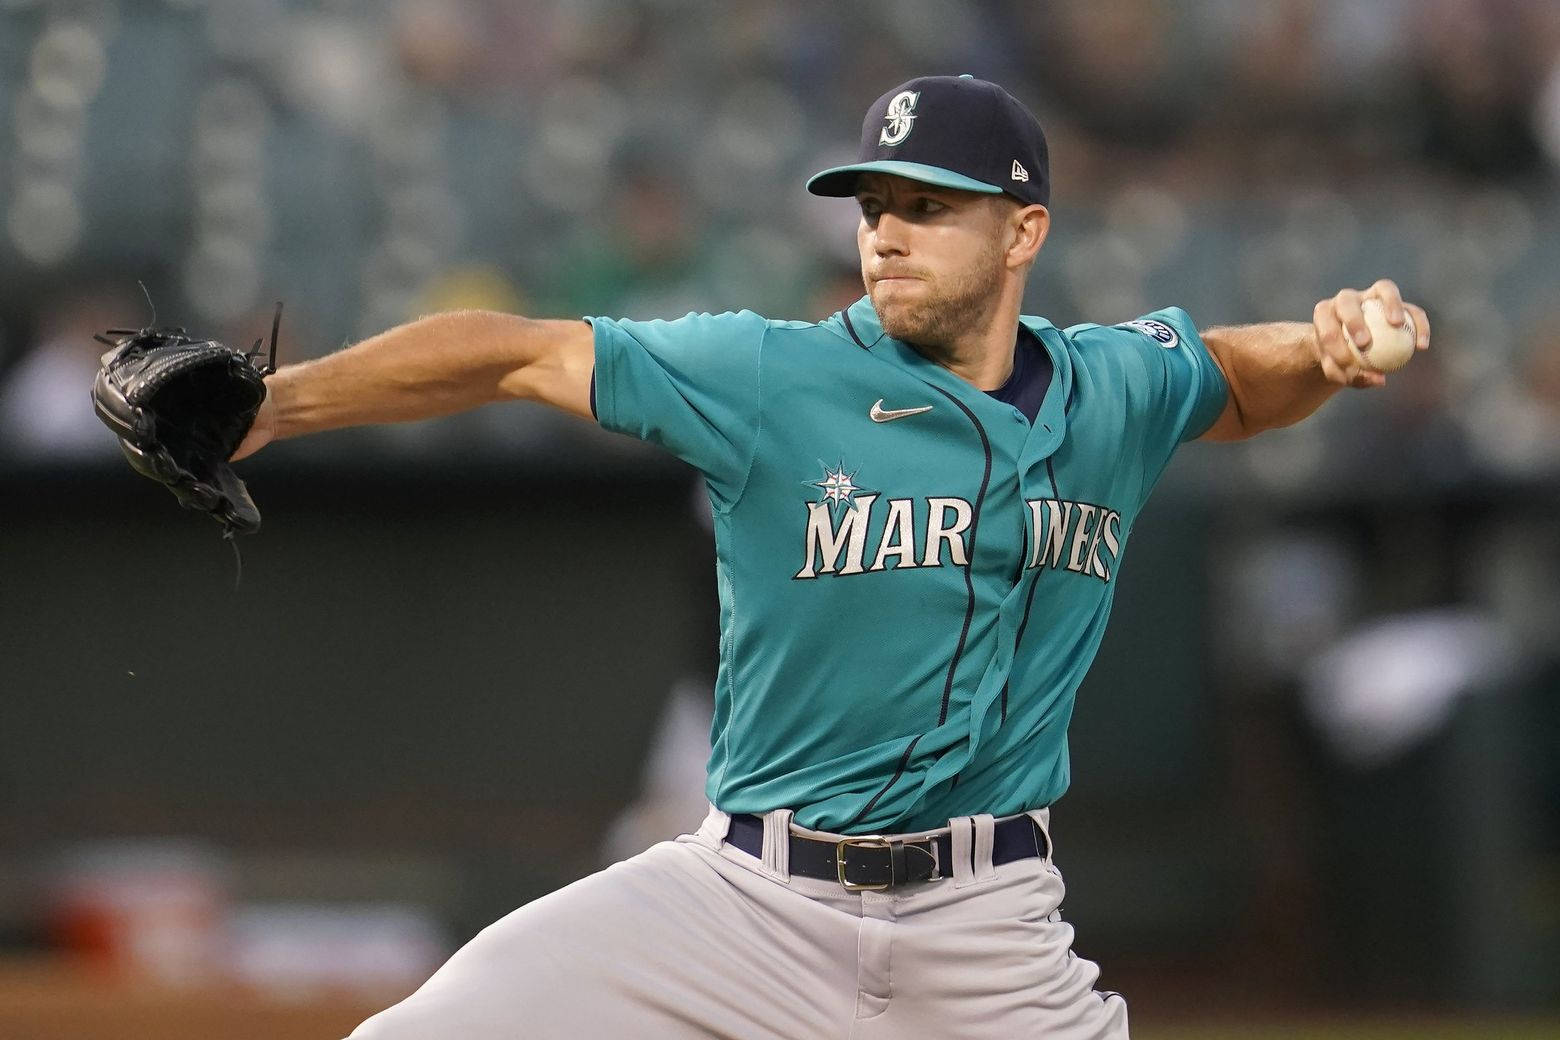 Download Tyler Anderson Wearing Teal Mariners Jersey Wallpaper